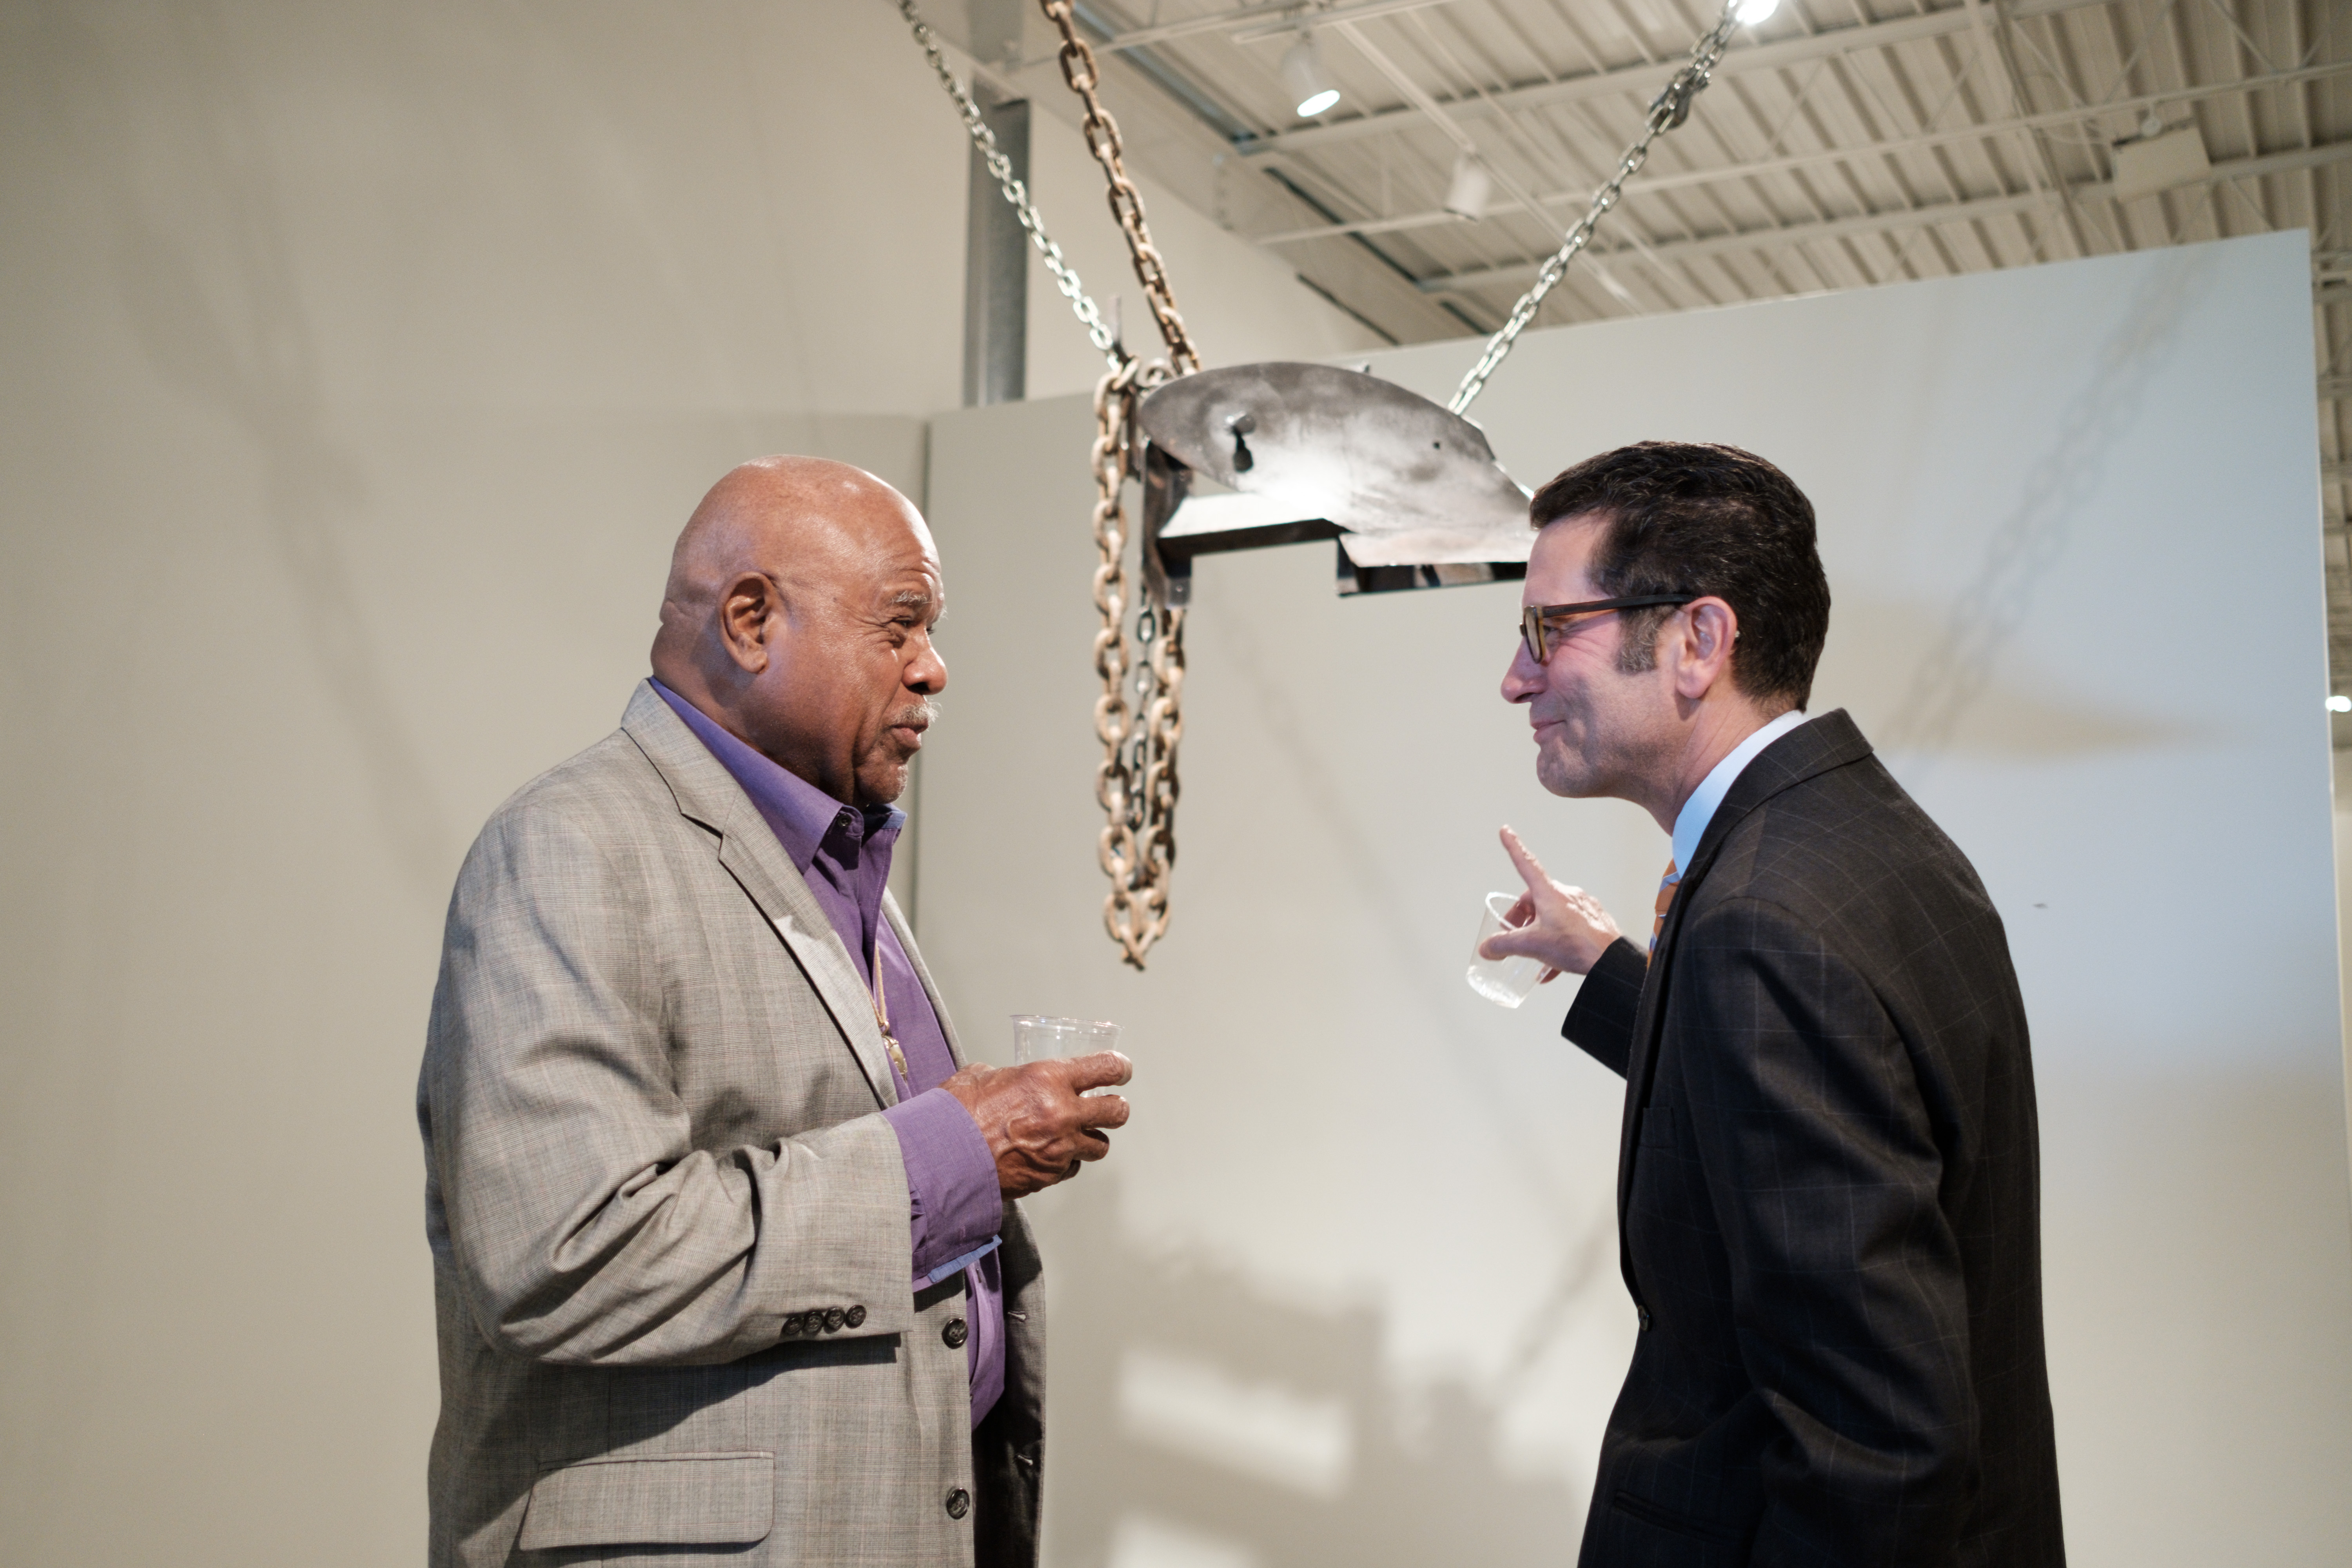 Two men are talking to each other in front of a multimedia piece of art hanging from the ceiling. They are both in suits.